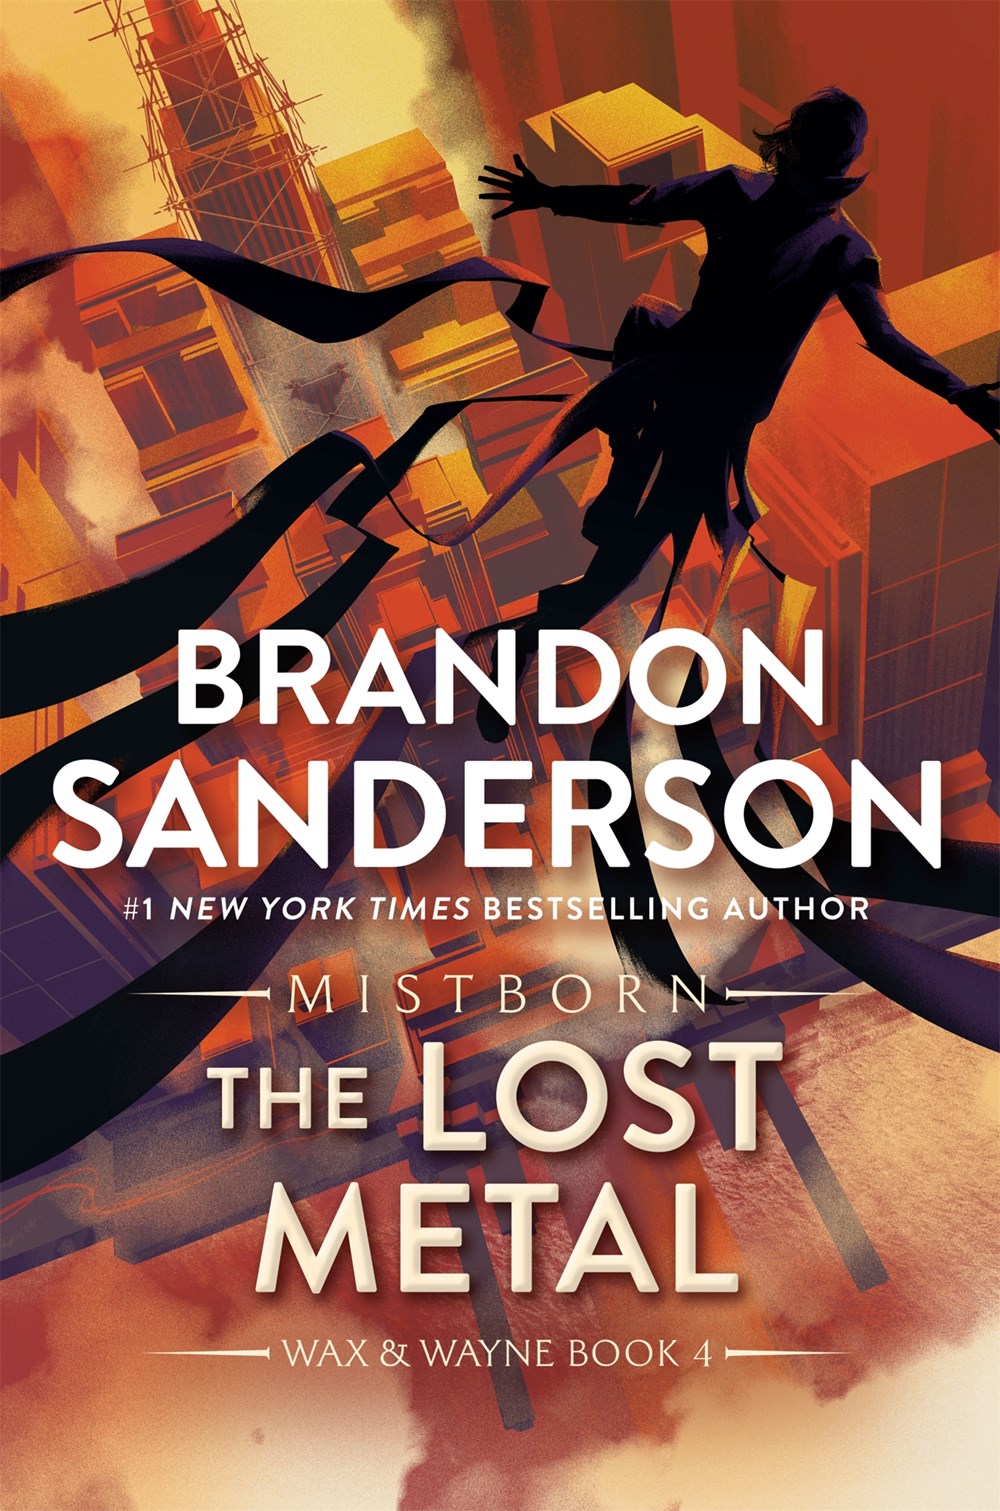 The Lost Metal by Brandon Sanderson (A Mistborn Novel, Book 7)